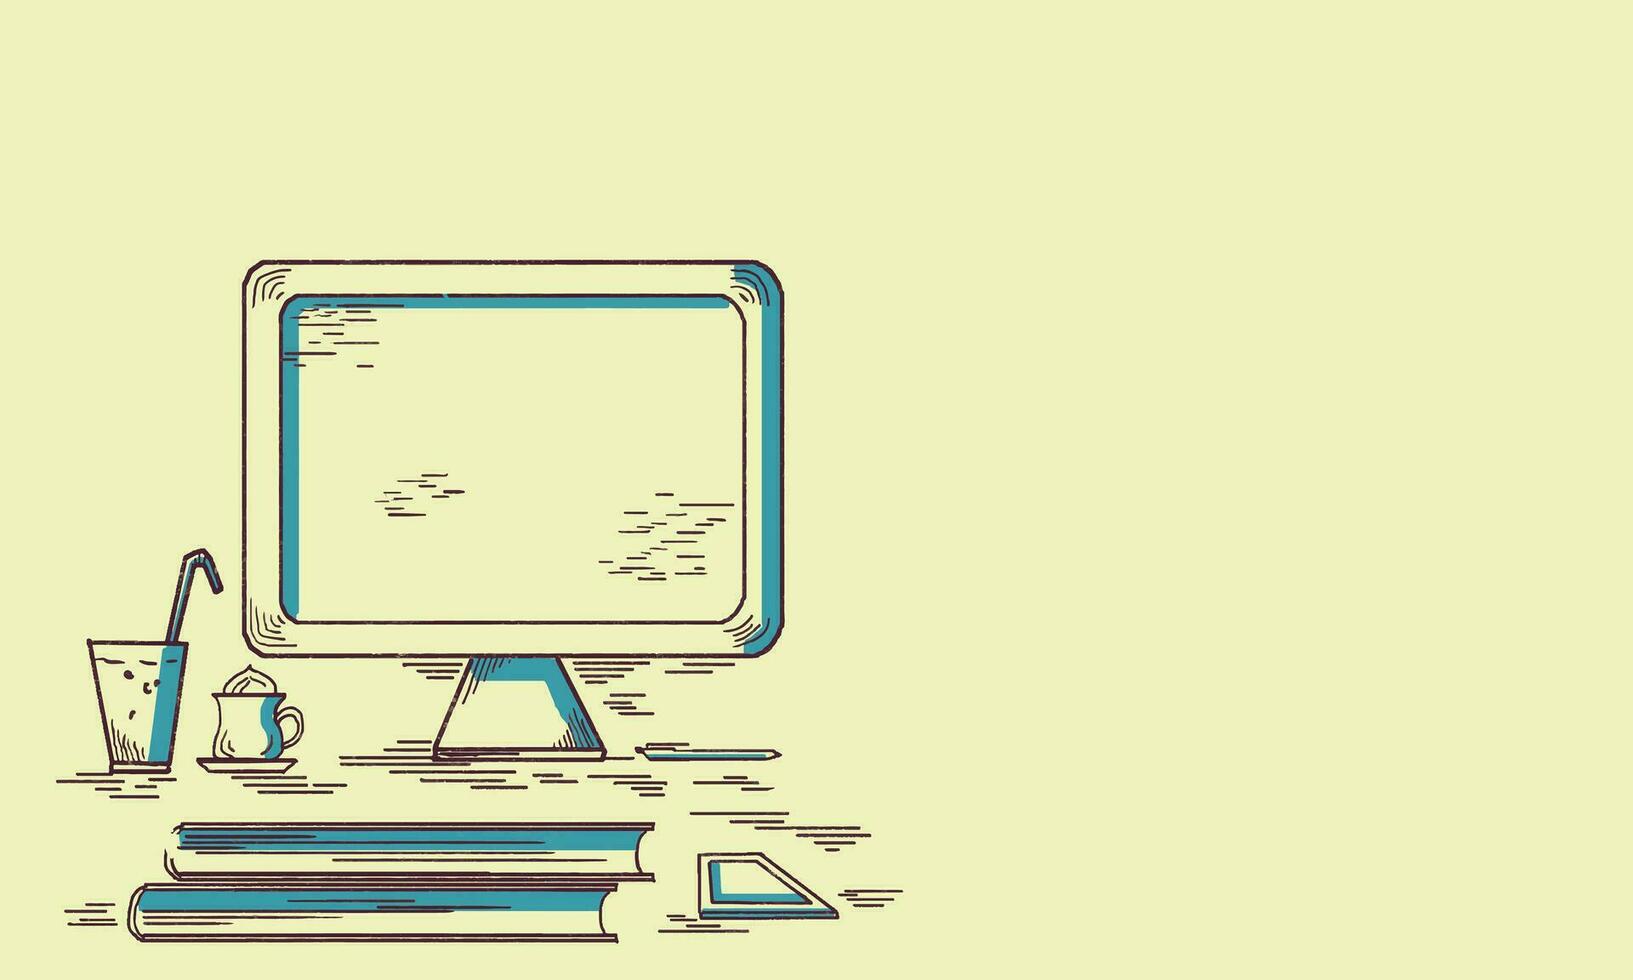 Illustration of computer with sketch effect in plane Background vector